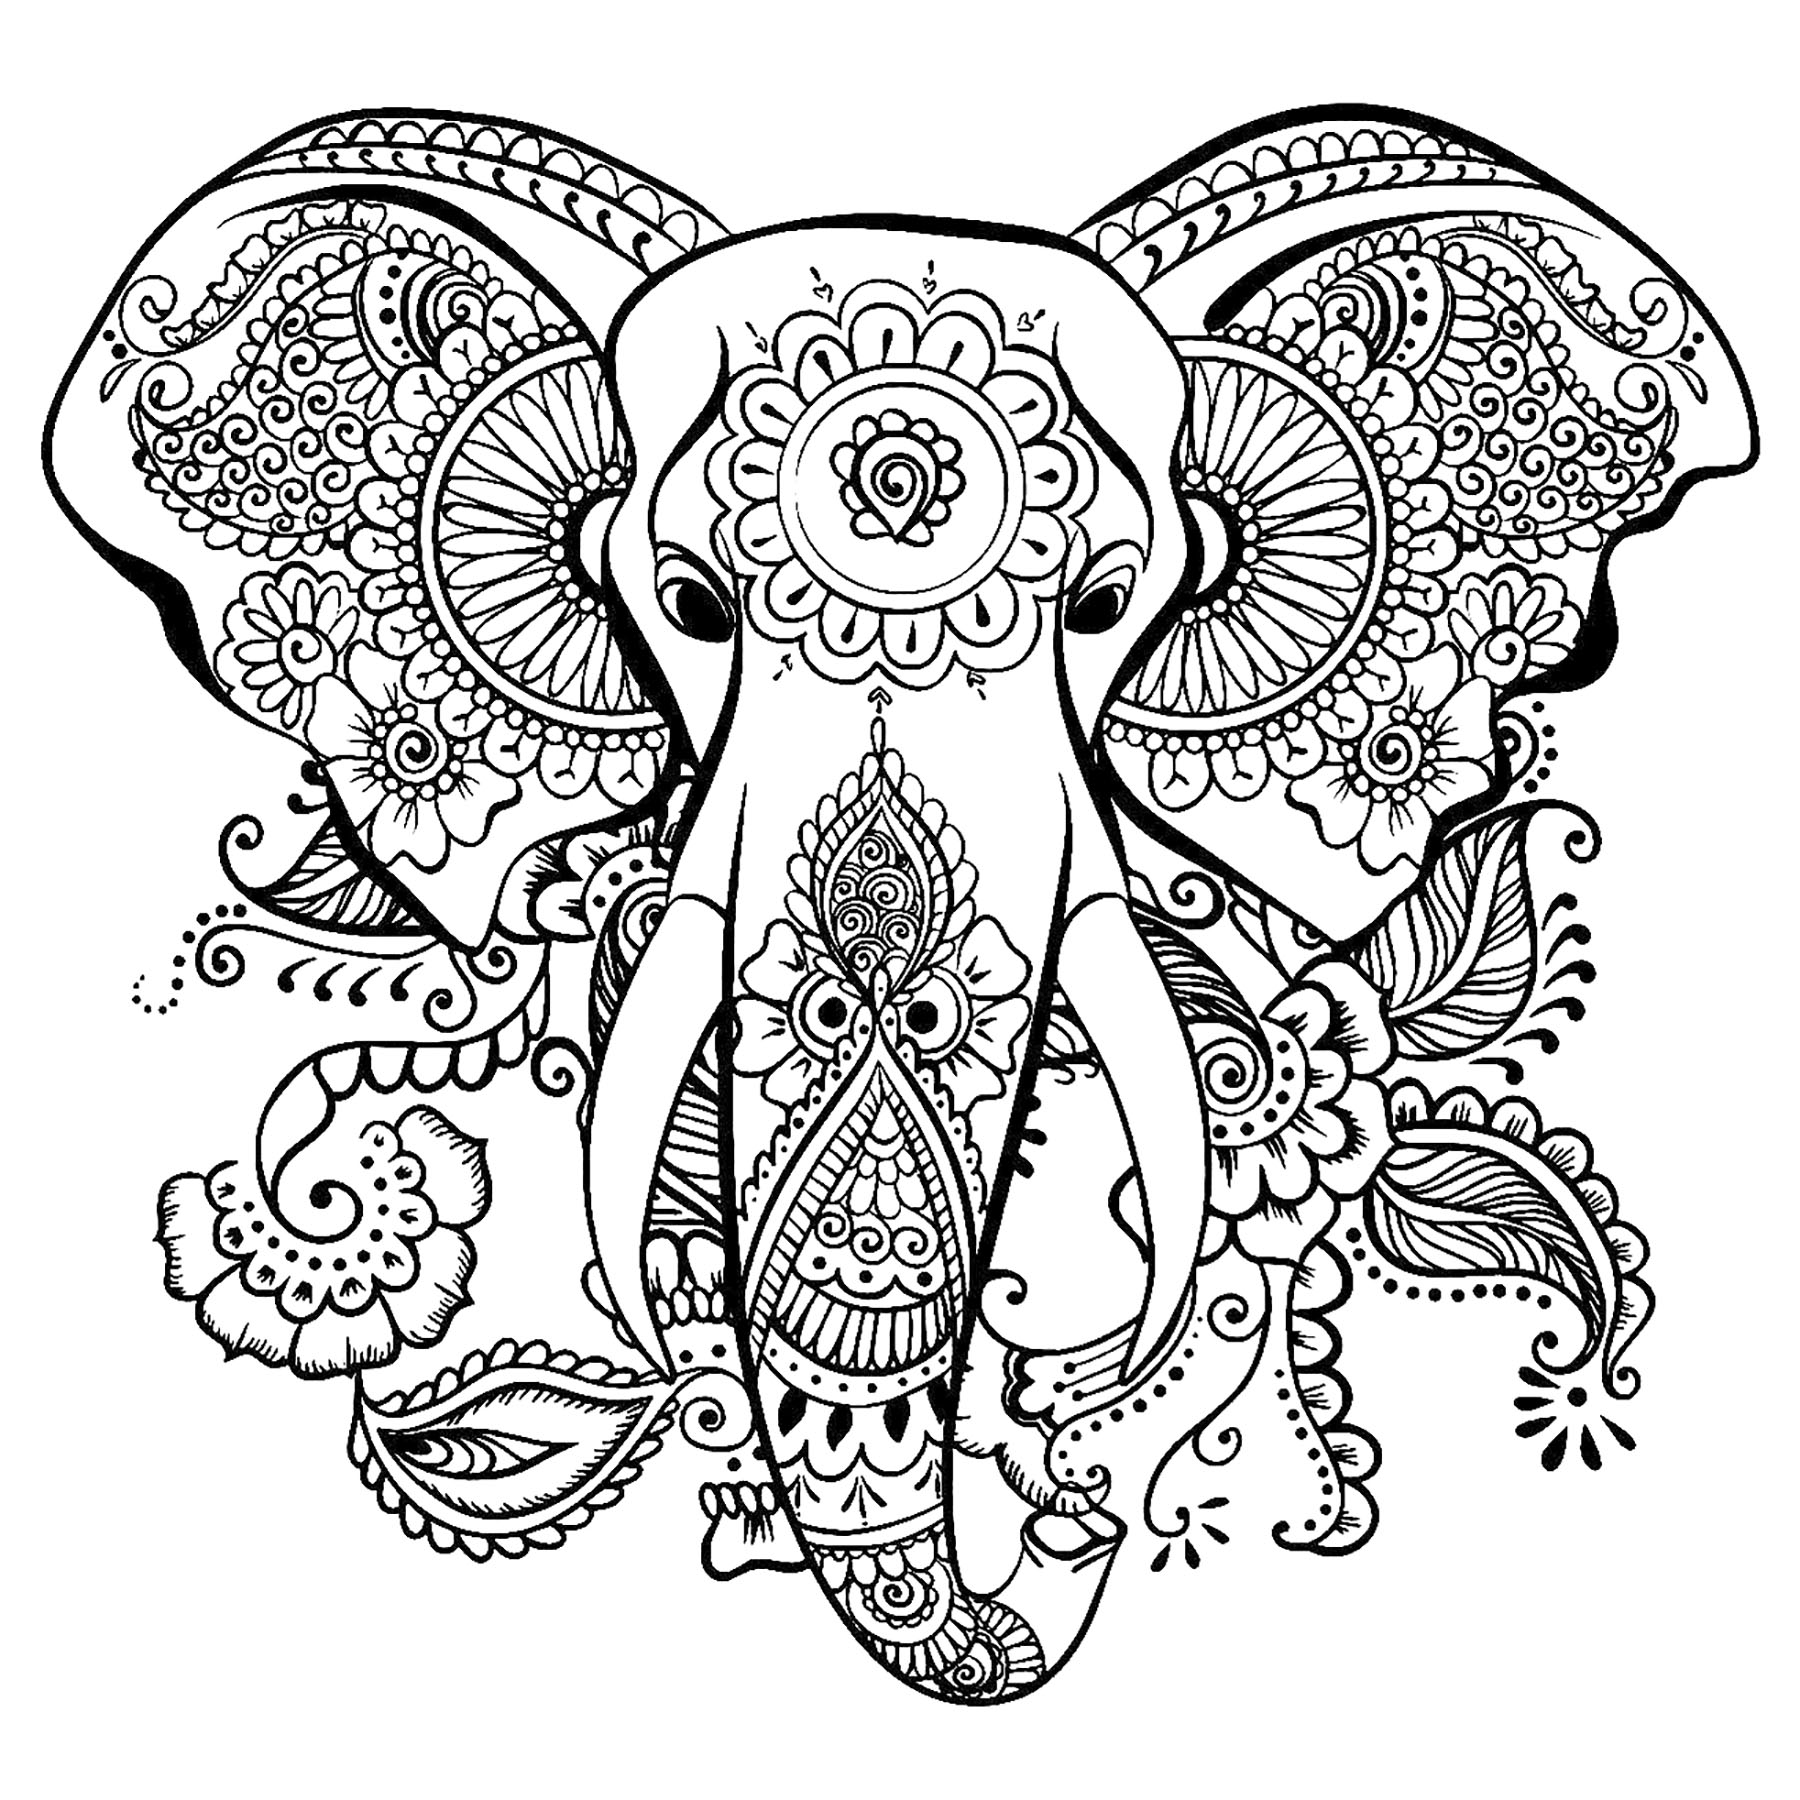 Elegant drawing of an elephant - Elephants Adult Coloring Pages